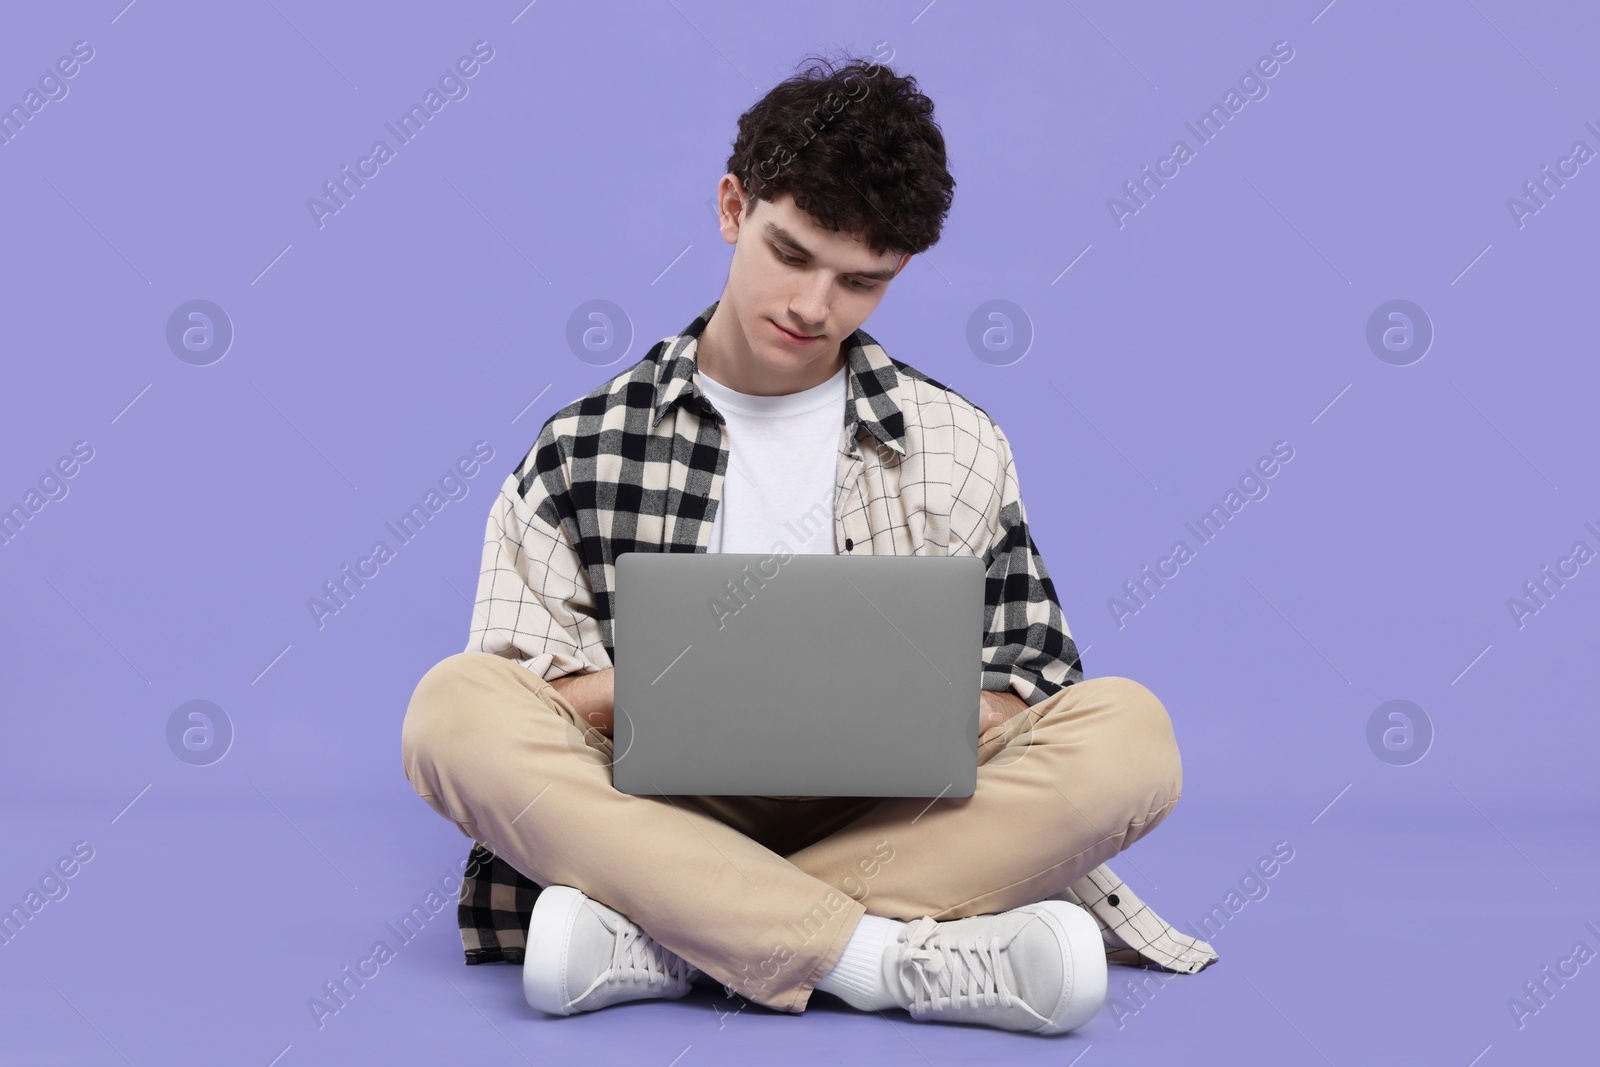 Photo of Portrait of student with laptop sitting on purple background